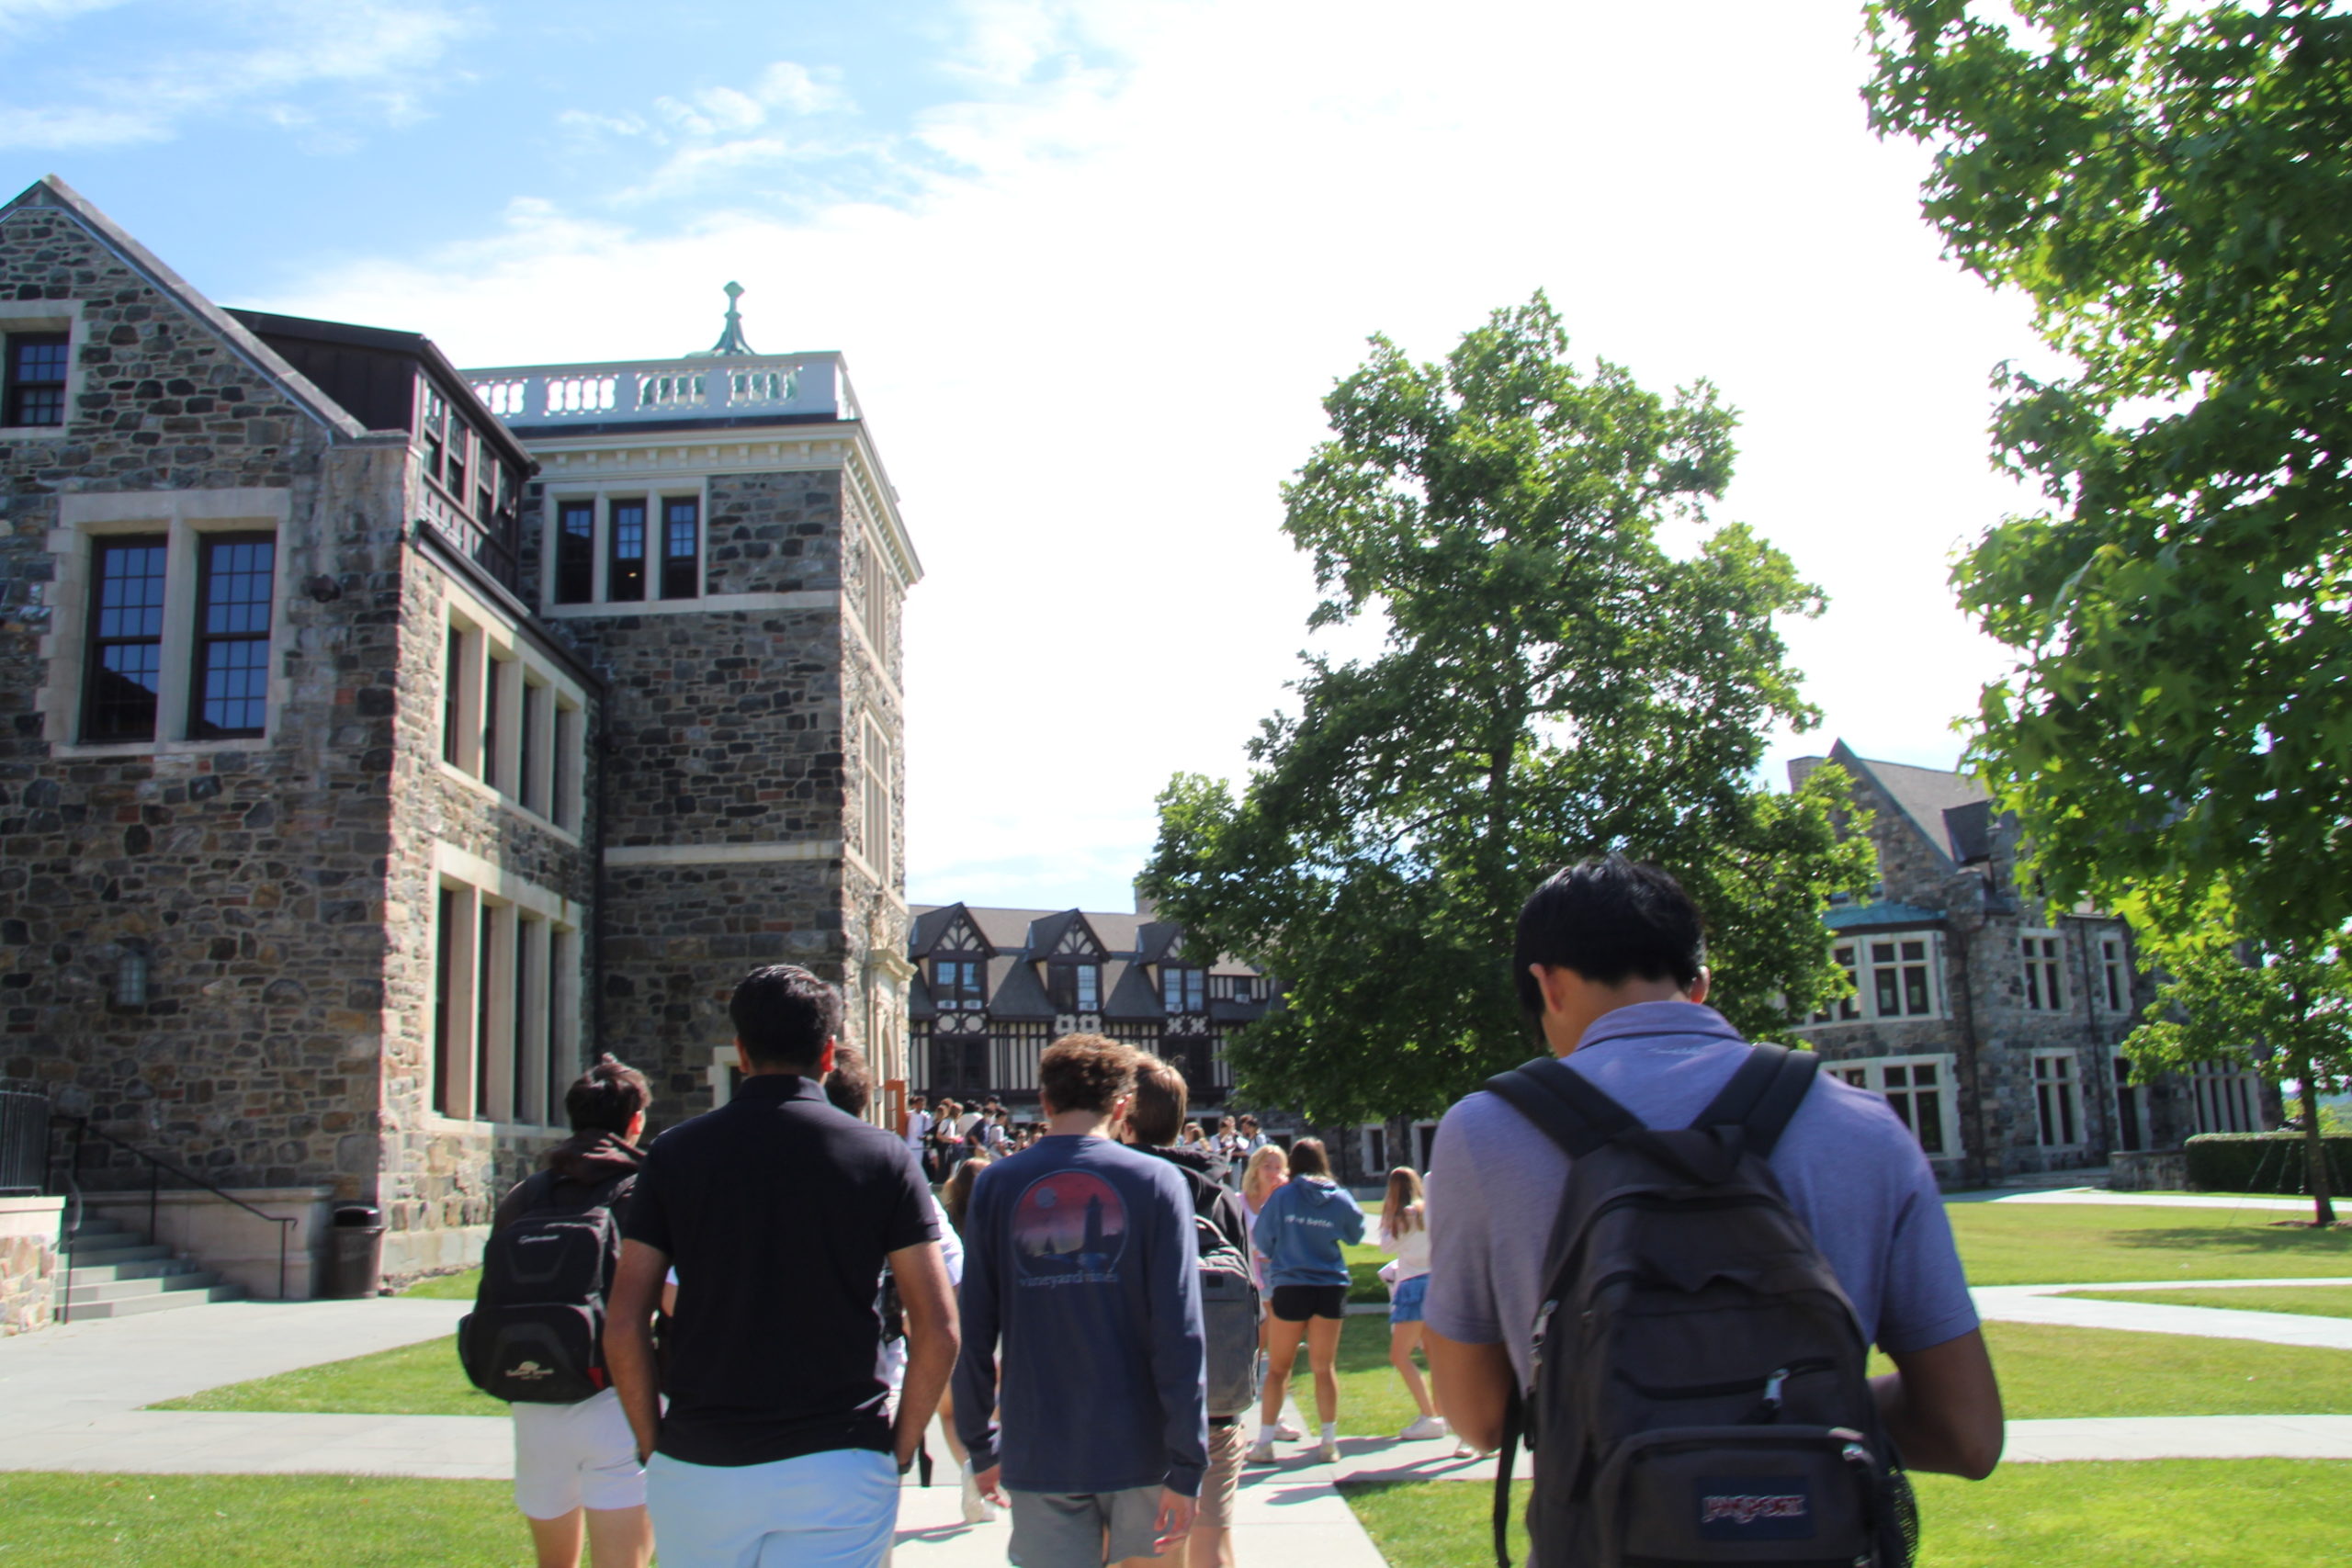 Juniors and sophomores walk to the Quad. After being instructed to go back inside or stay outside, the students either line up along the halls or encircle the Quad. The seniors final destination on the Graduation Walk was the through the senior lounge and onto the Quad.